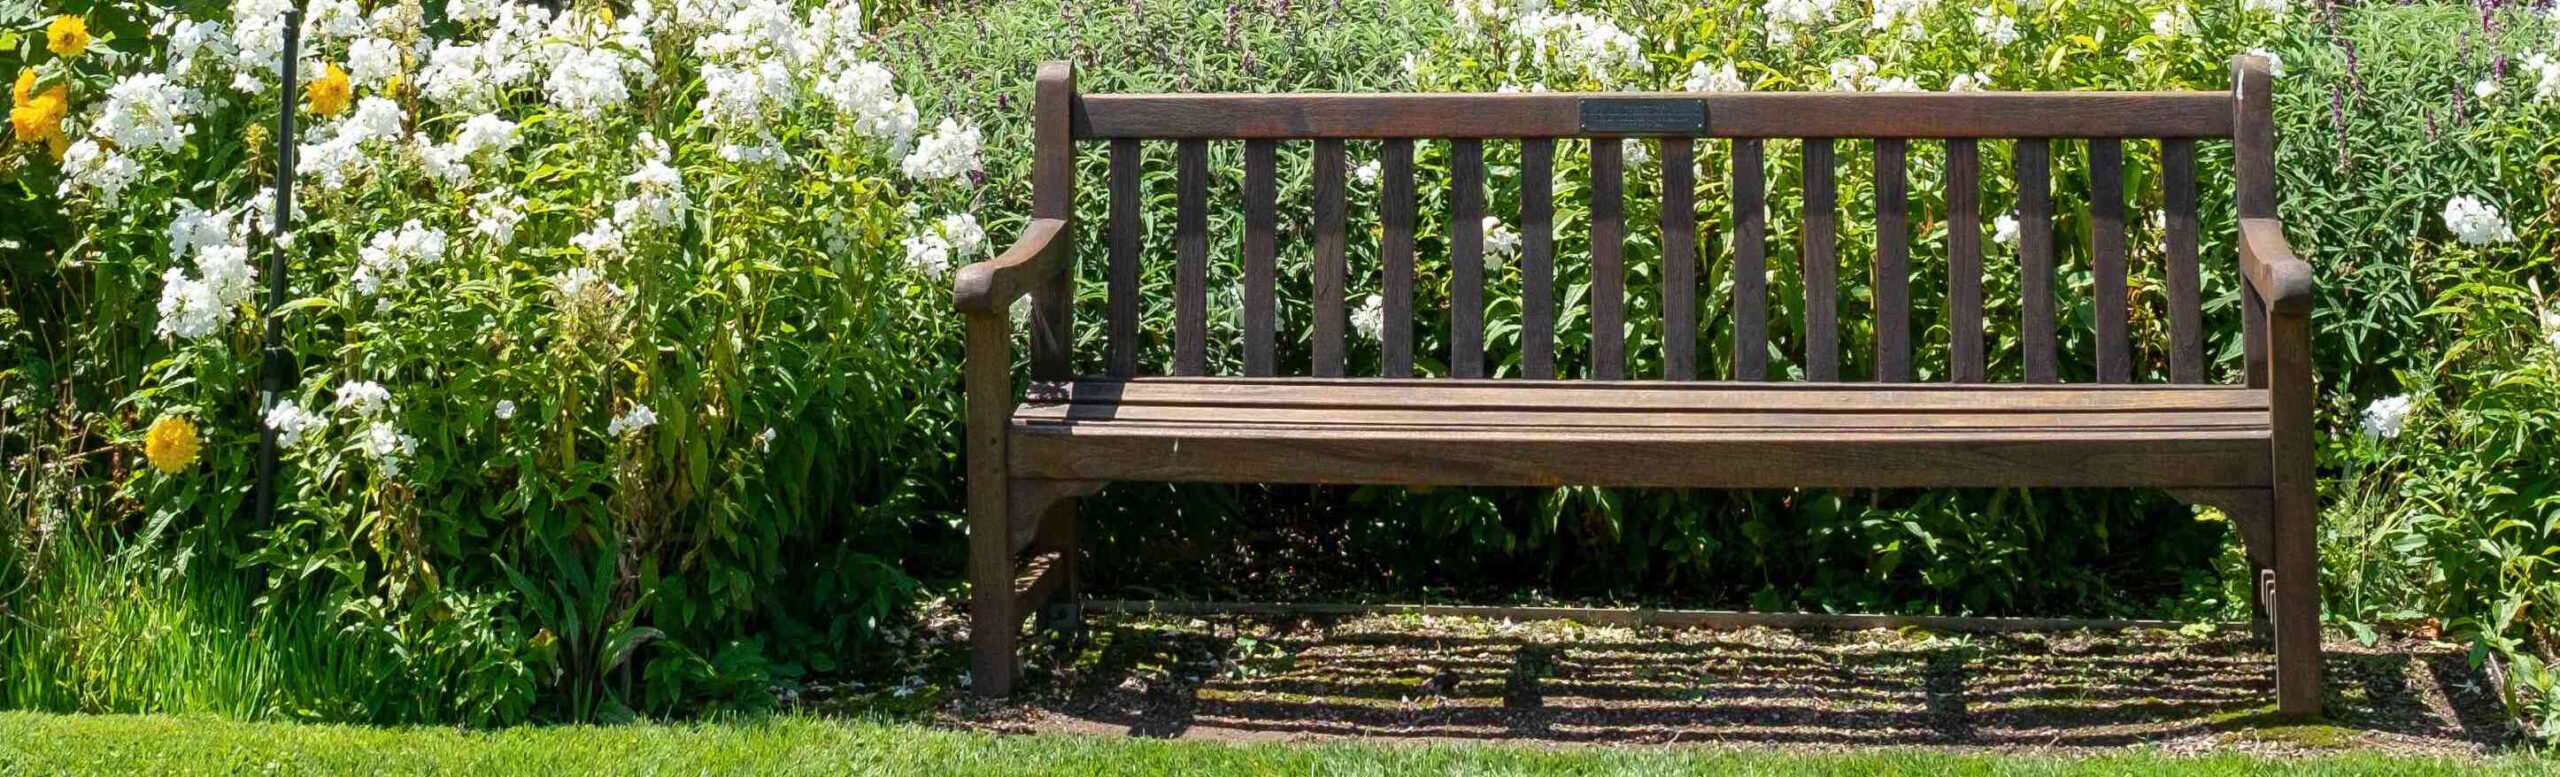 Bench with flowers